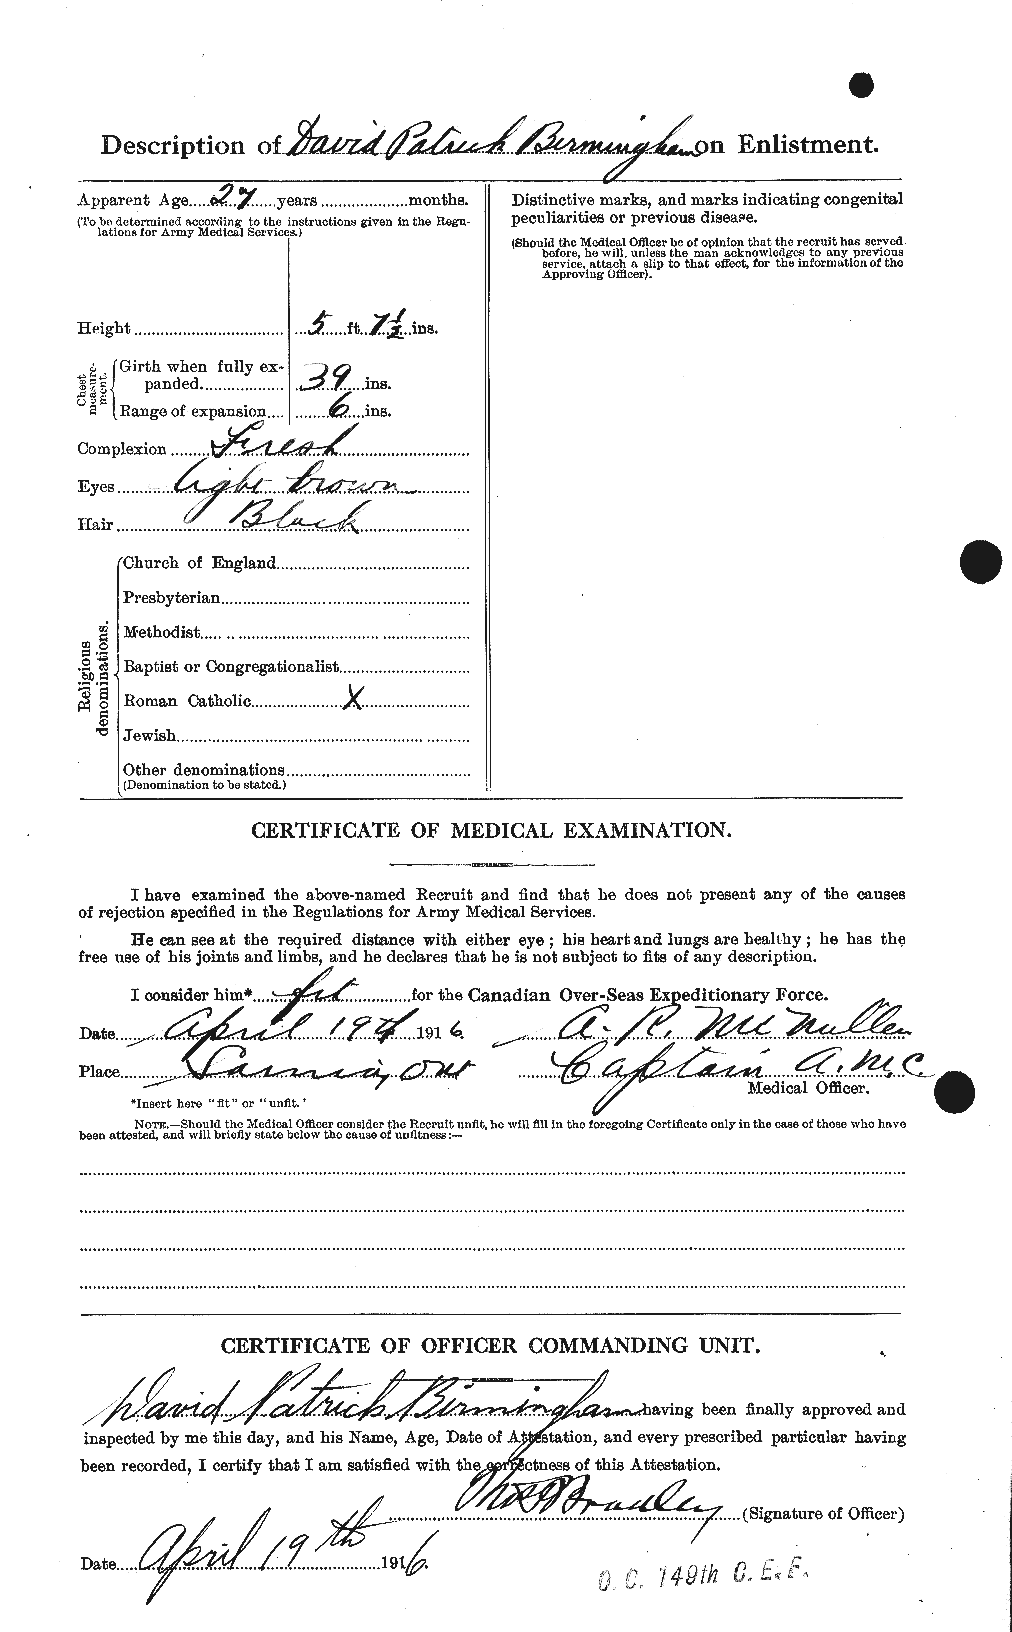 Personnel Records of the First World War - CEF 243928b